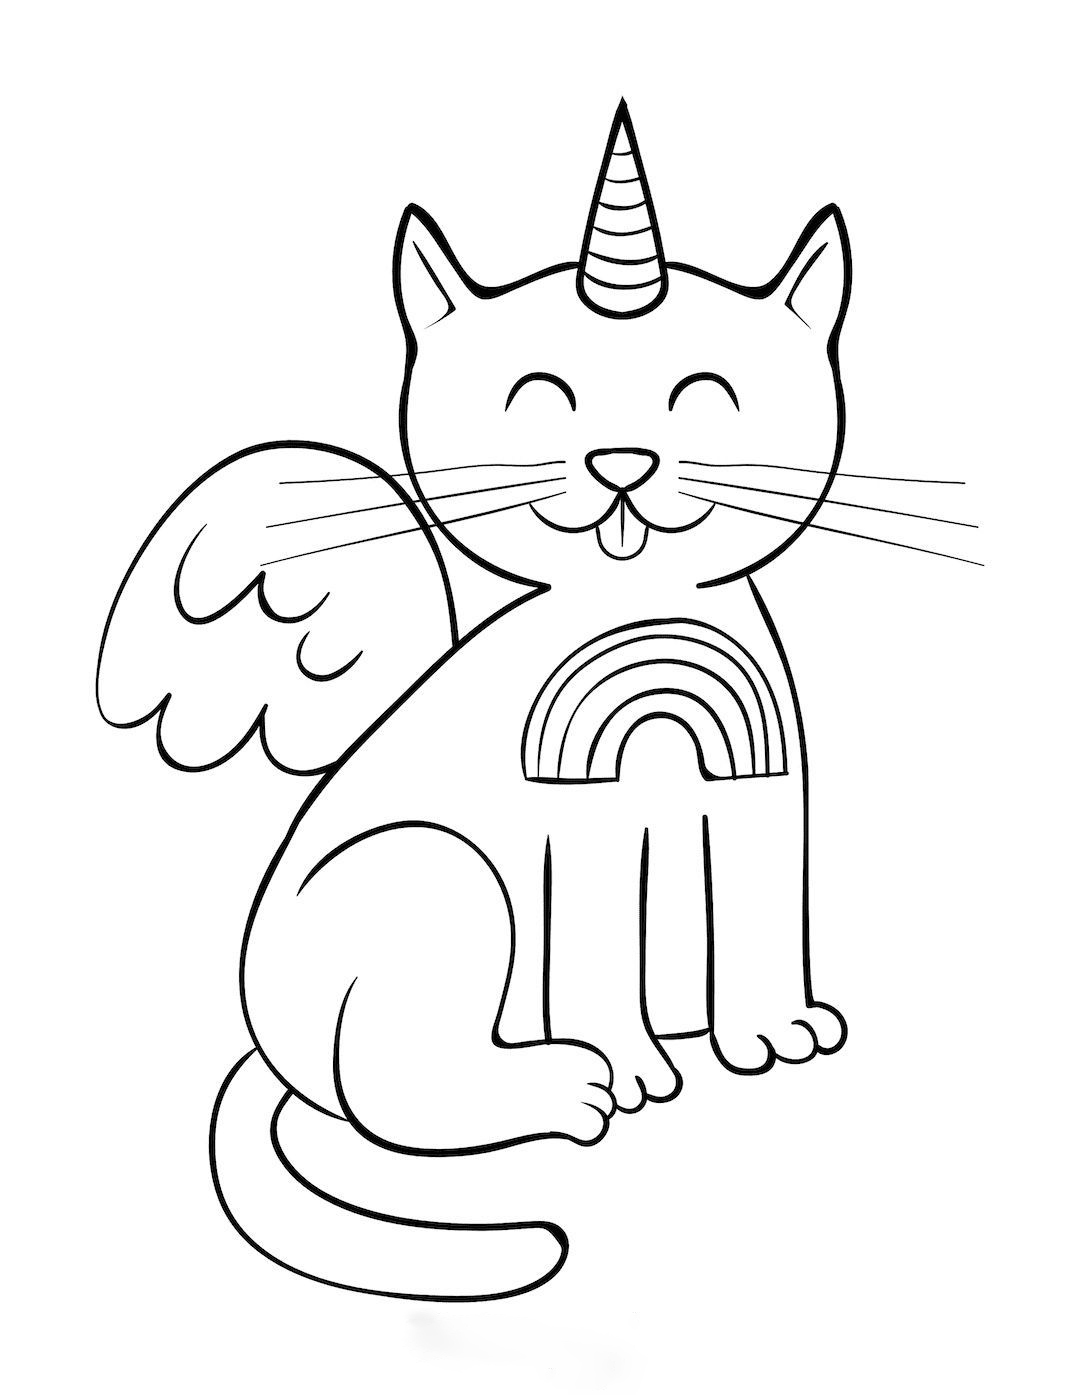 Unicorn Cat with wings Coloring Page